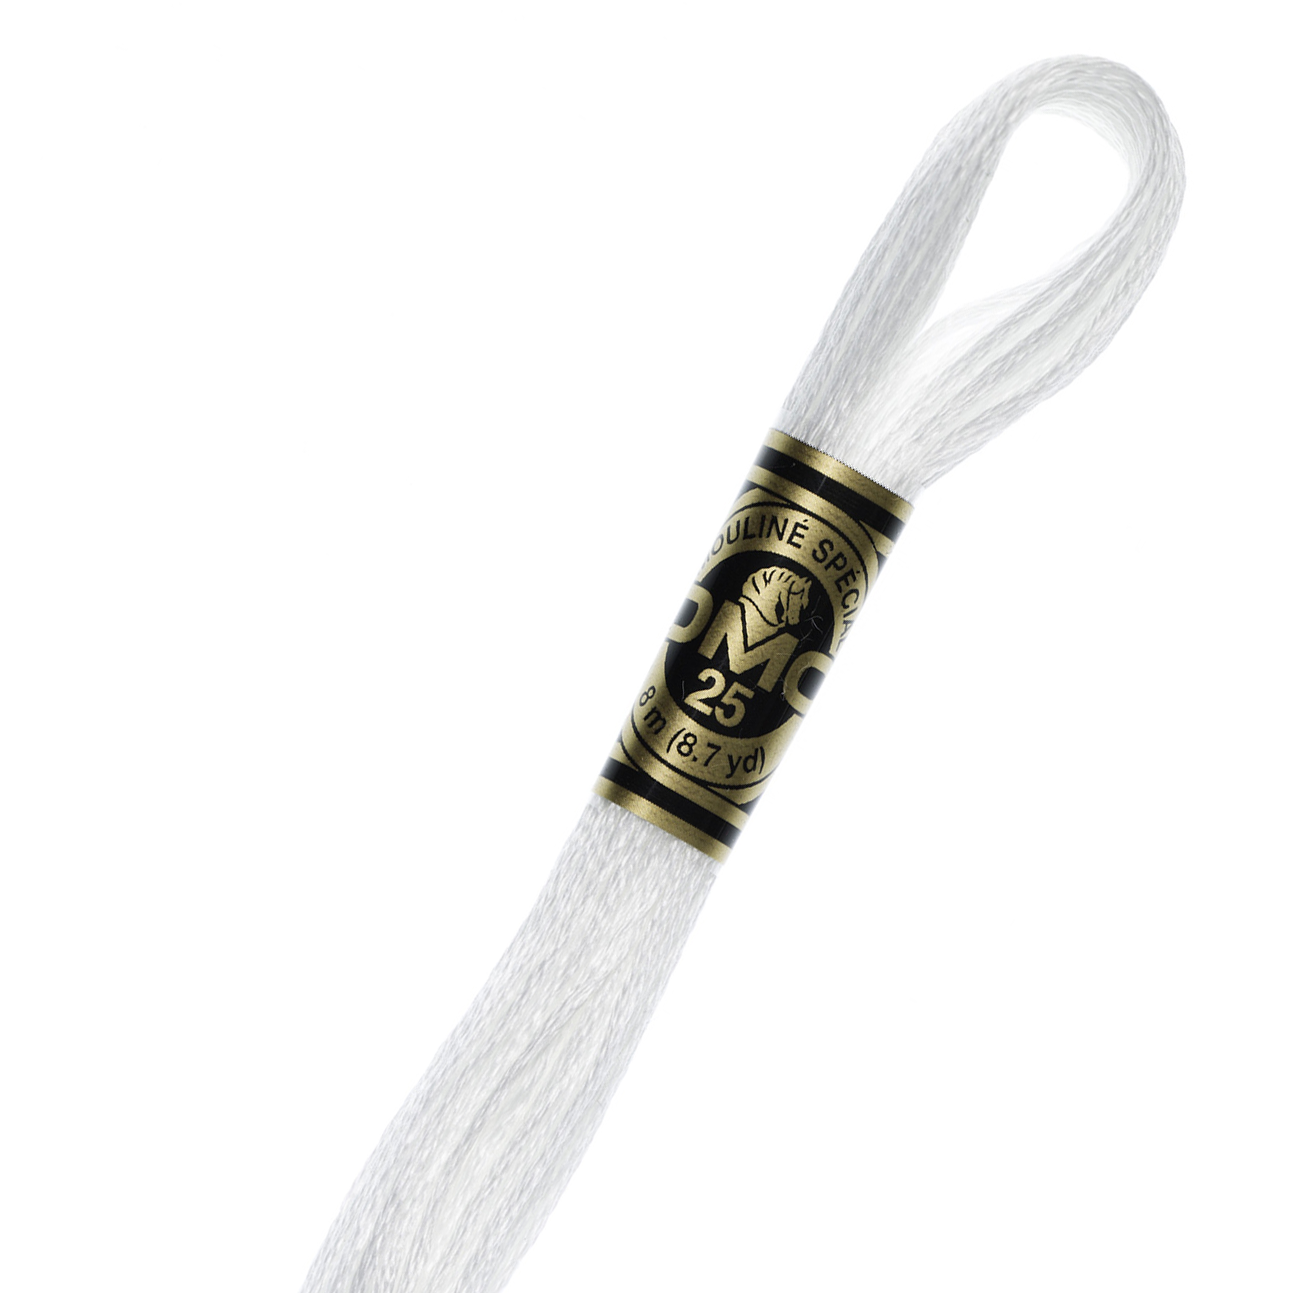 Anchor Embroidery Thread, White